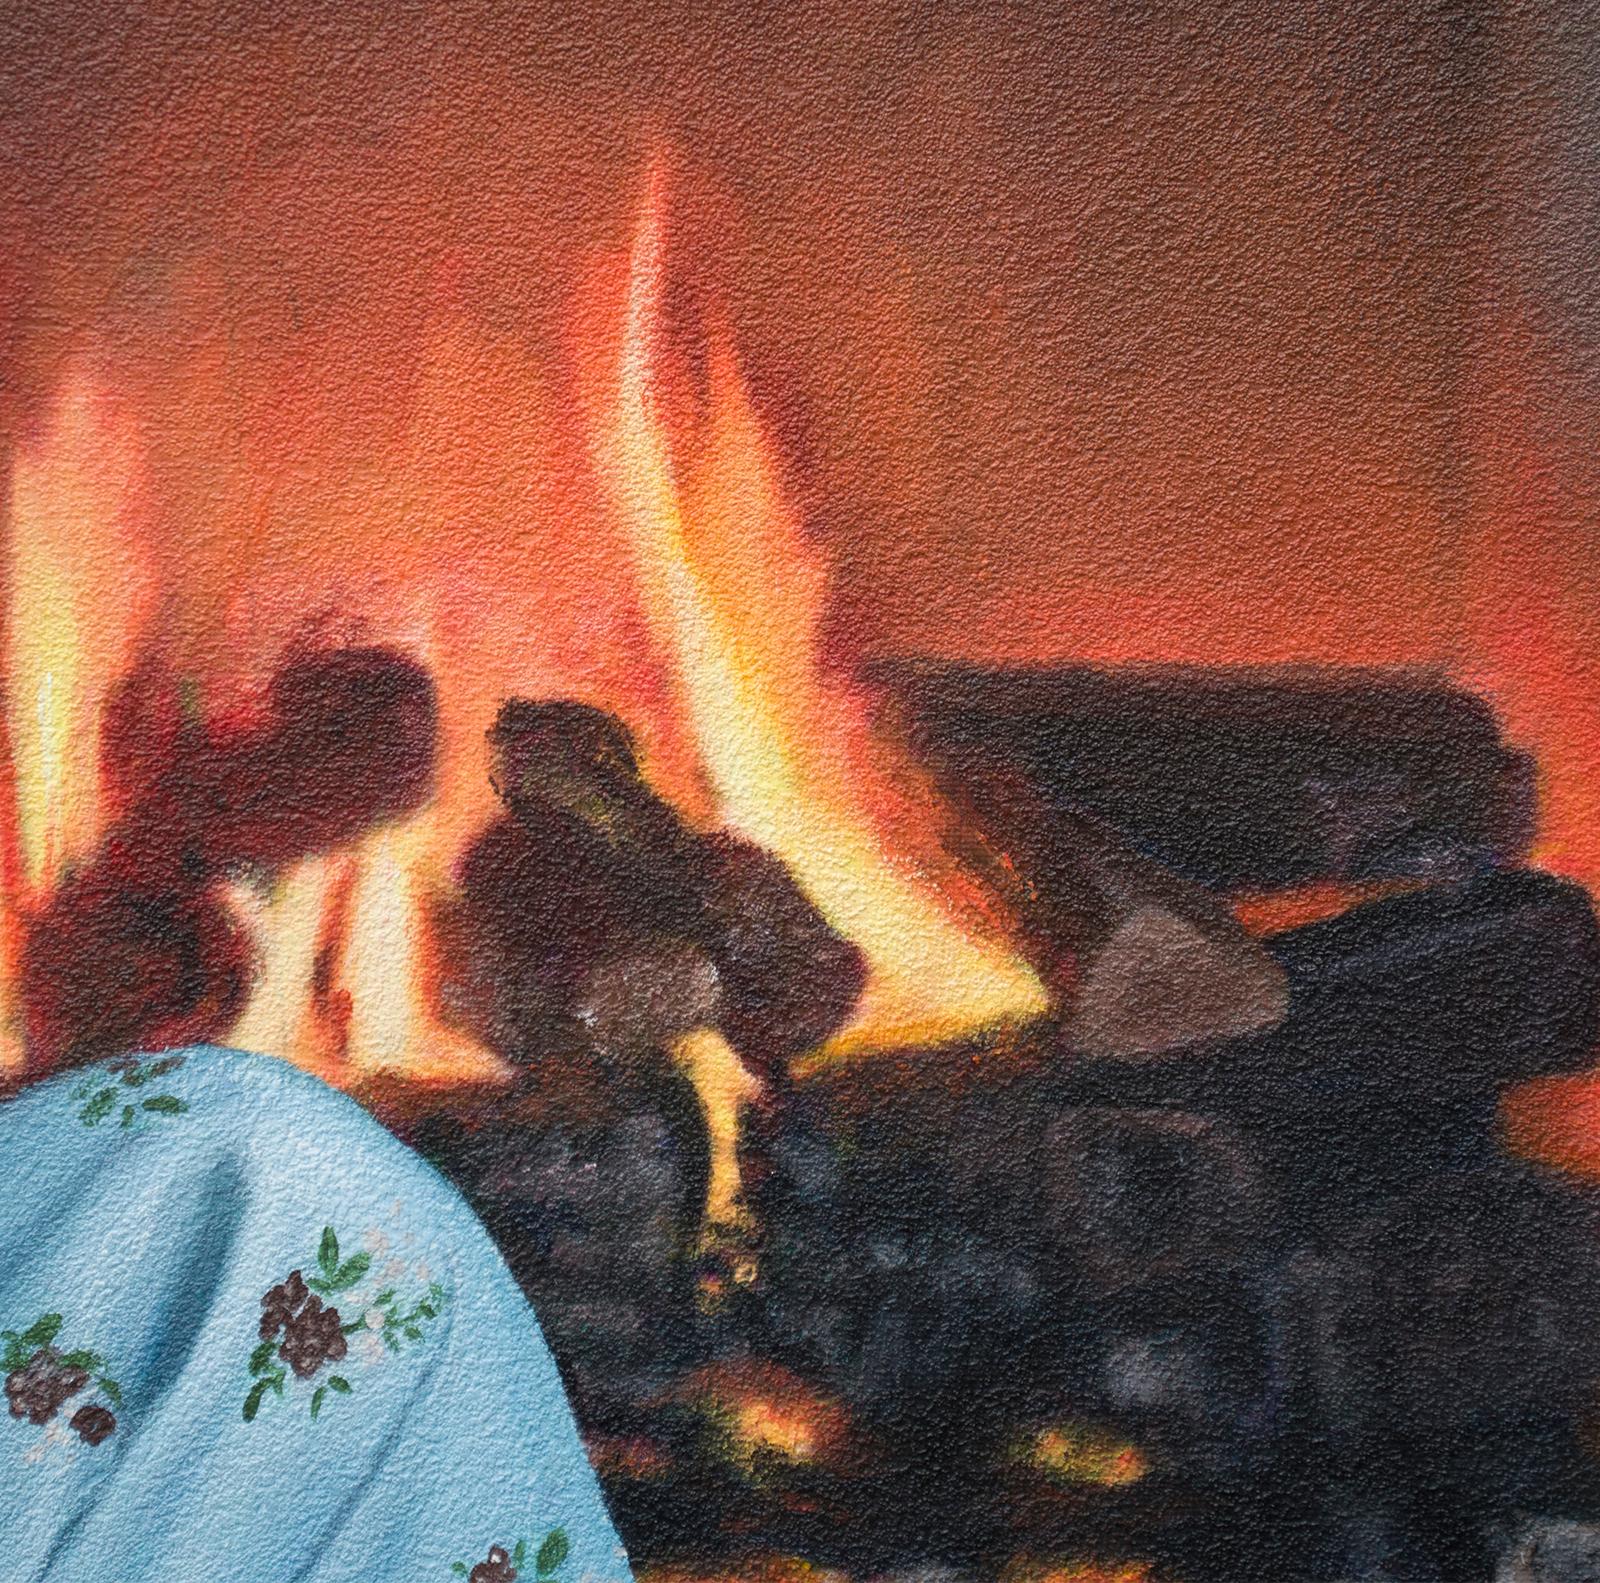 It’s good to sit somewhere near the fireplace). I've poured emotions onto the canvas using acrylic in this intimate scene. The warmth of the hearth parallels the aliveness of the subject's gaze, while the feline companions echo a comforting